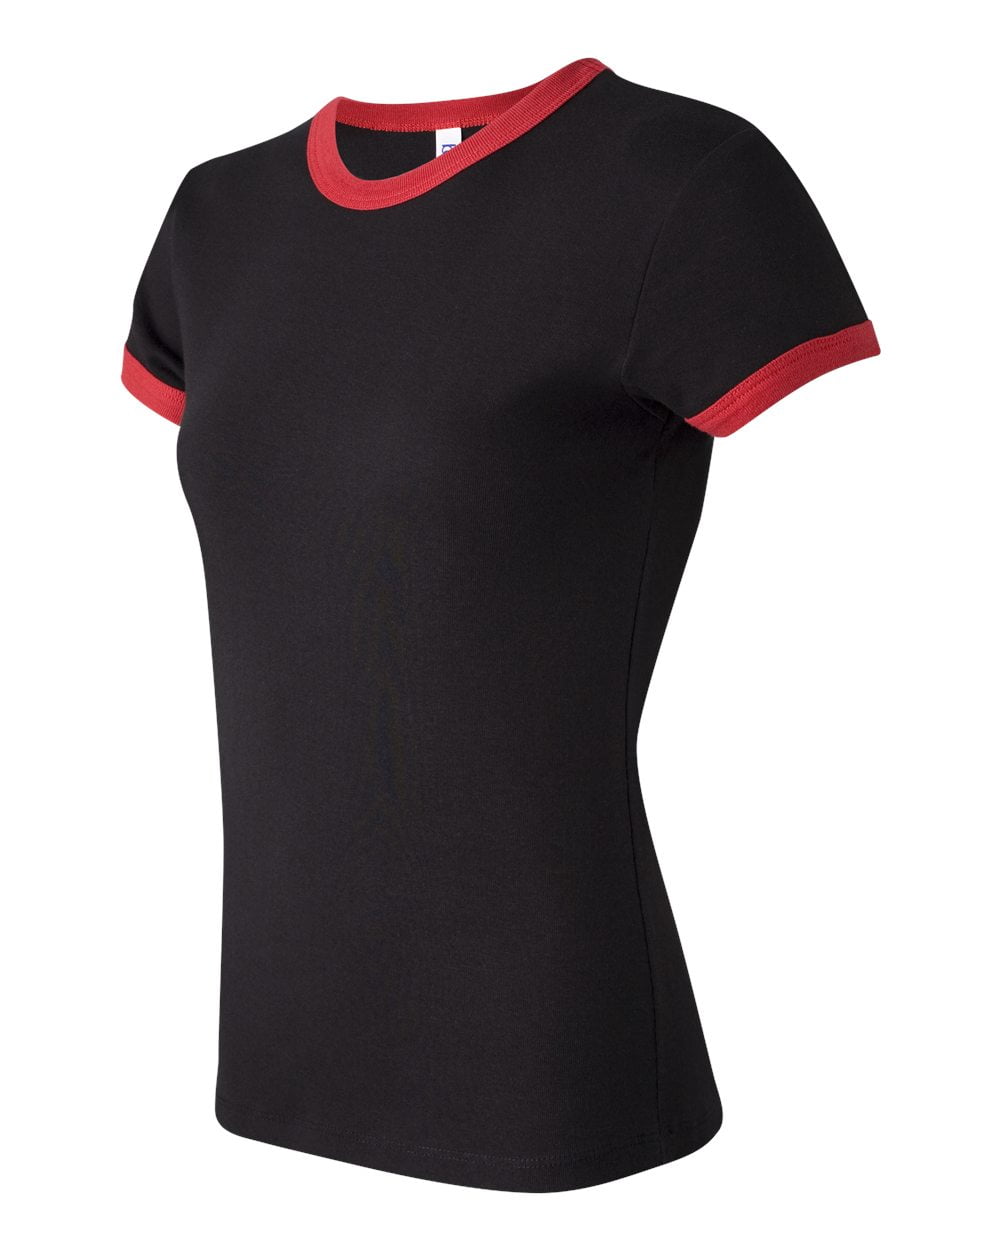 black and red ringer tee